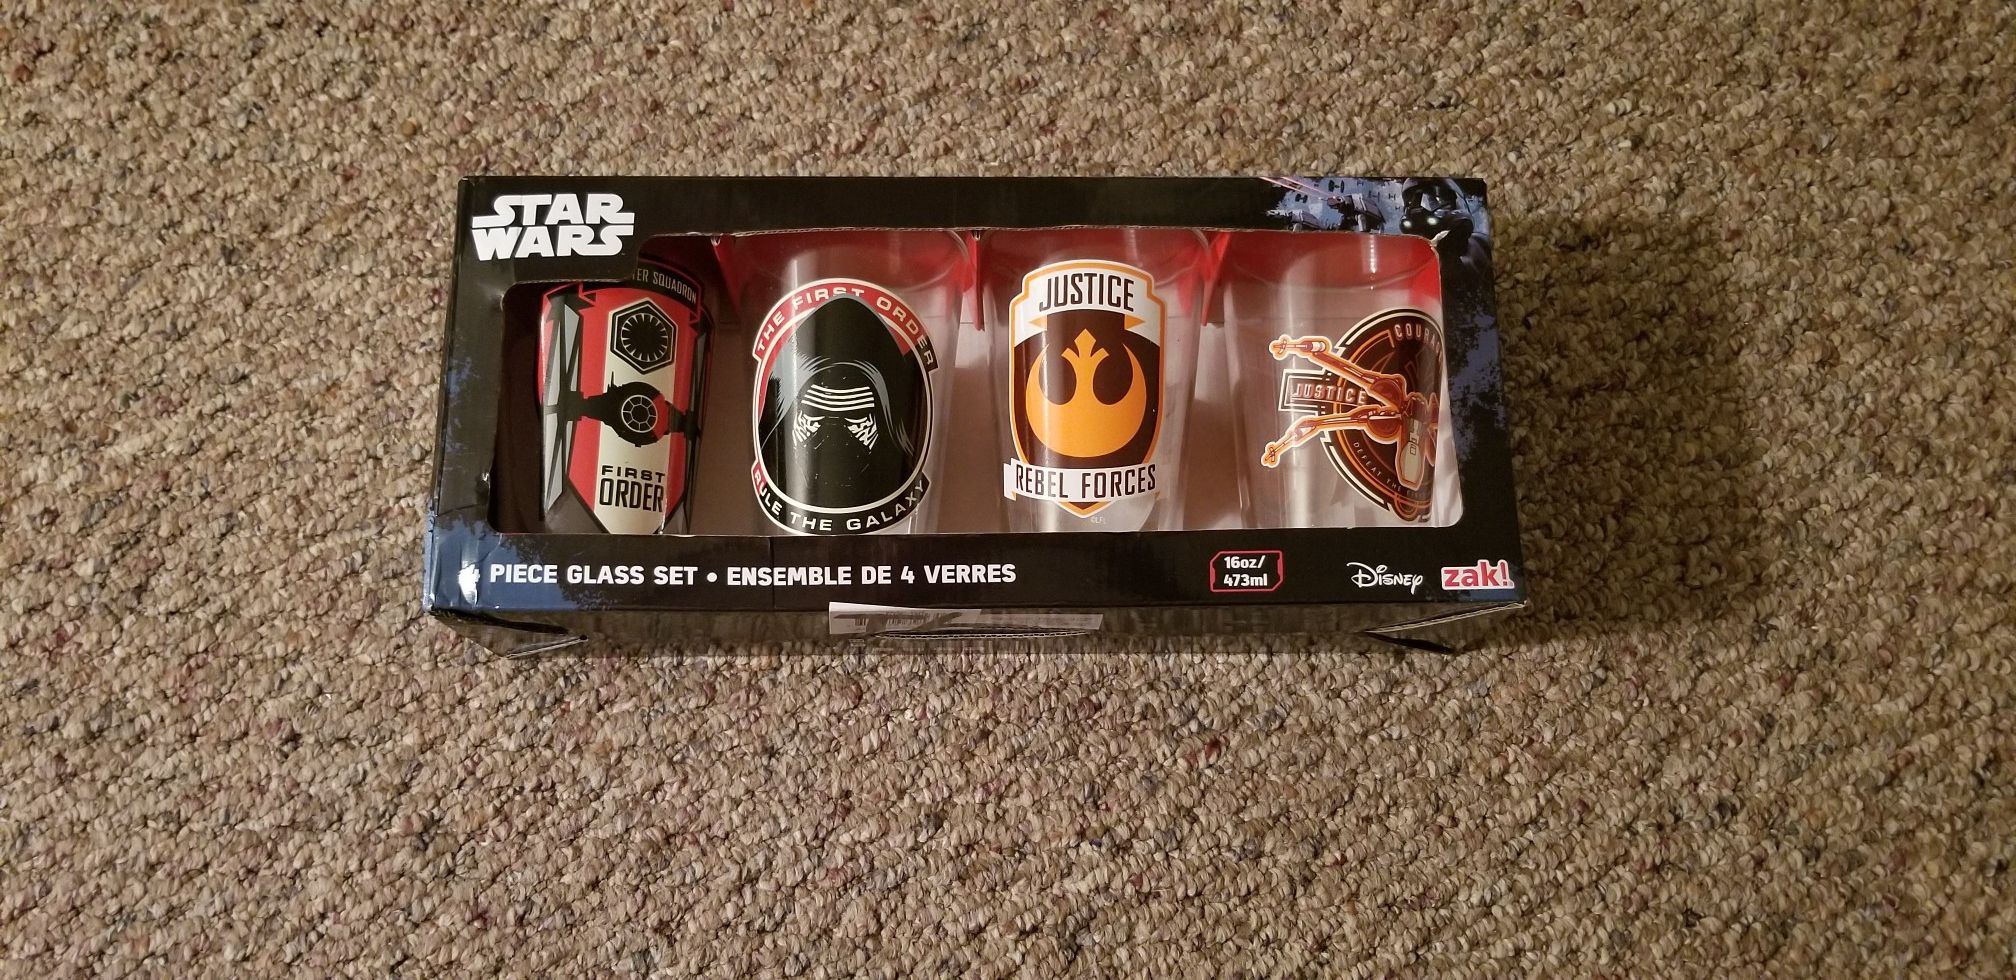 Star wars collectable glasses. 4 pack